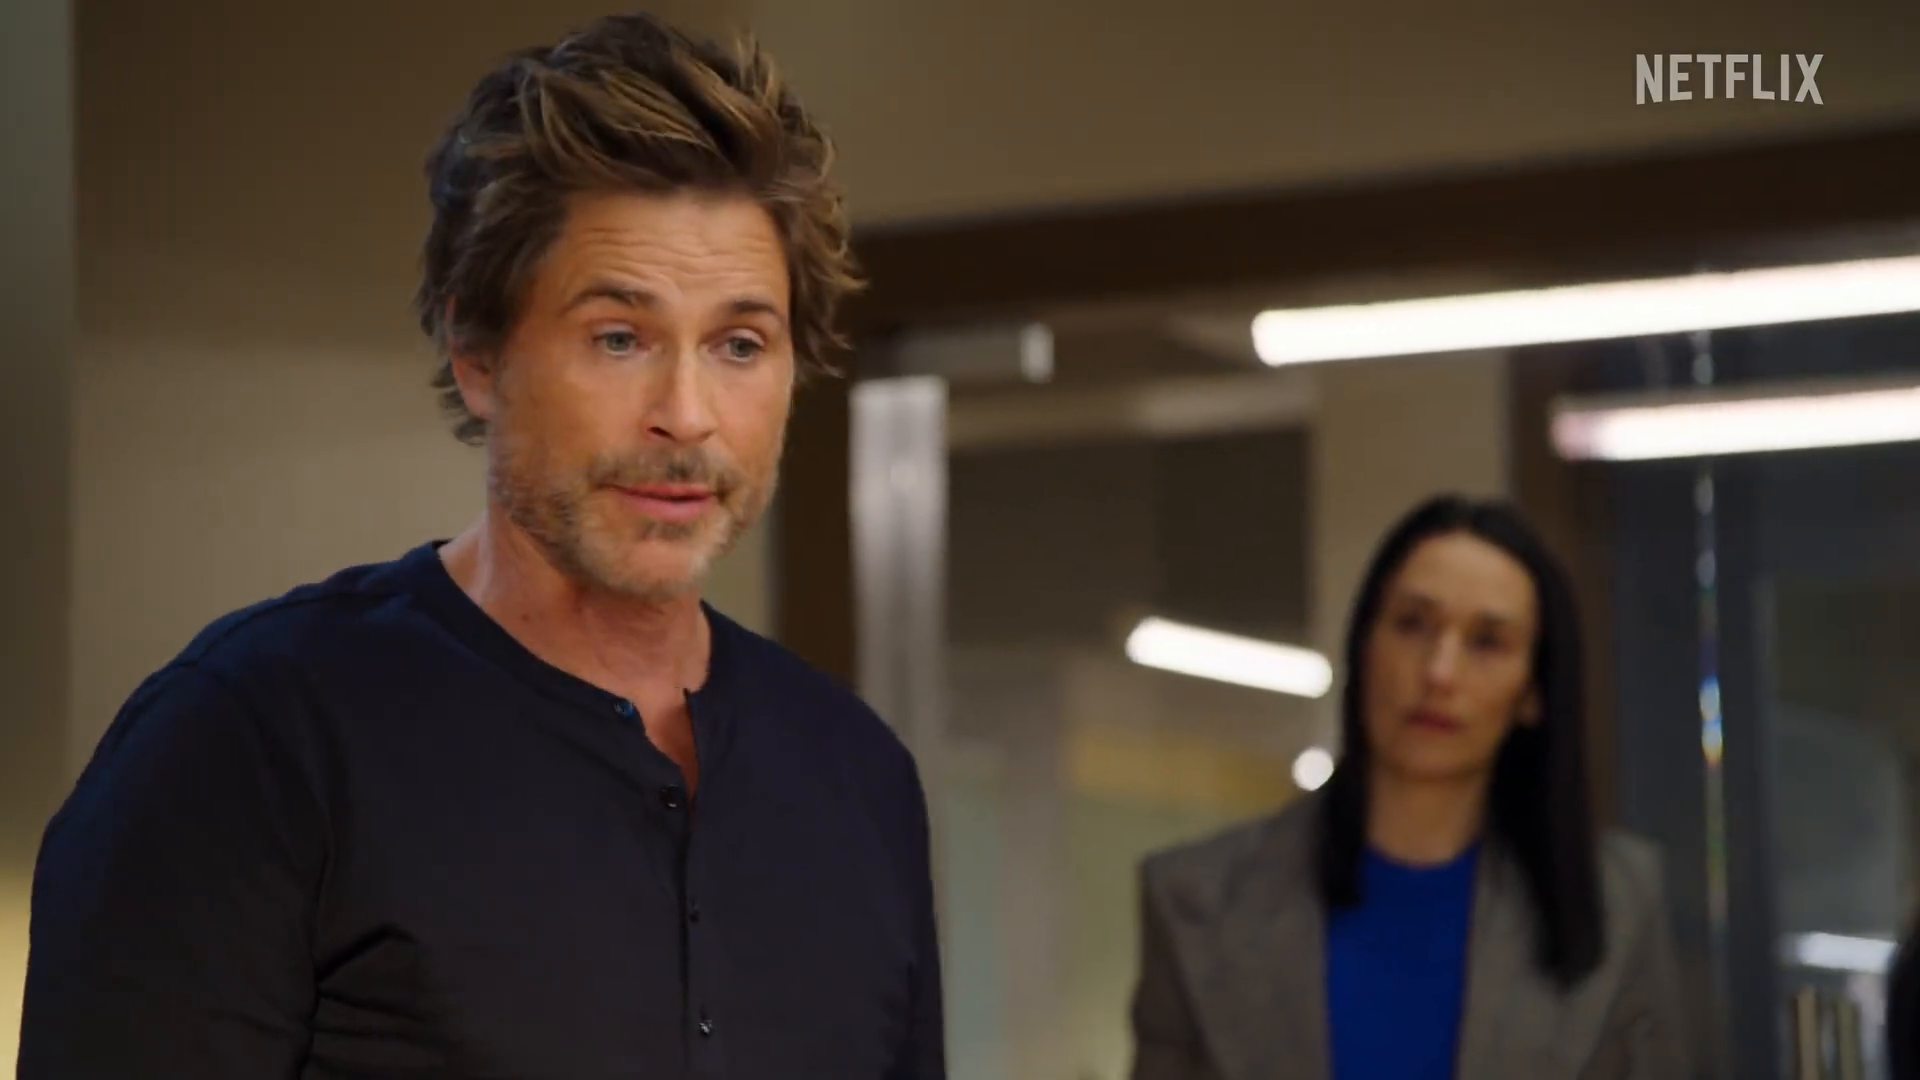 Rob Lowe plays an emotionally wrecked biotech genius in Netflix's new Unstable